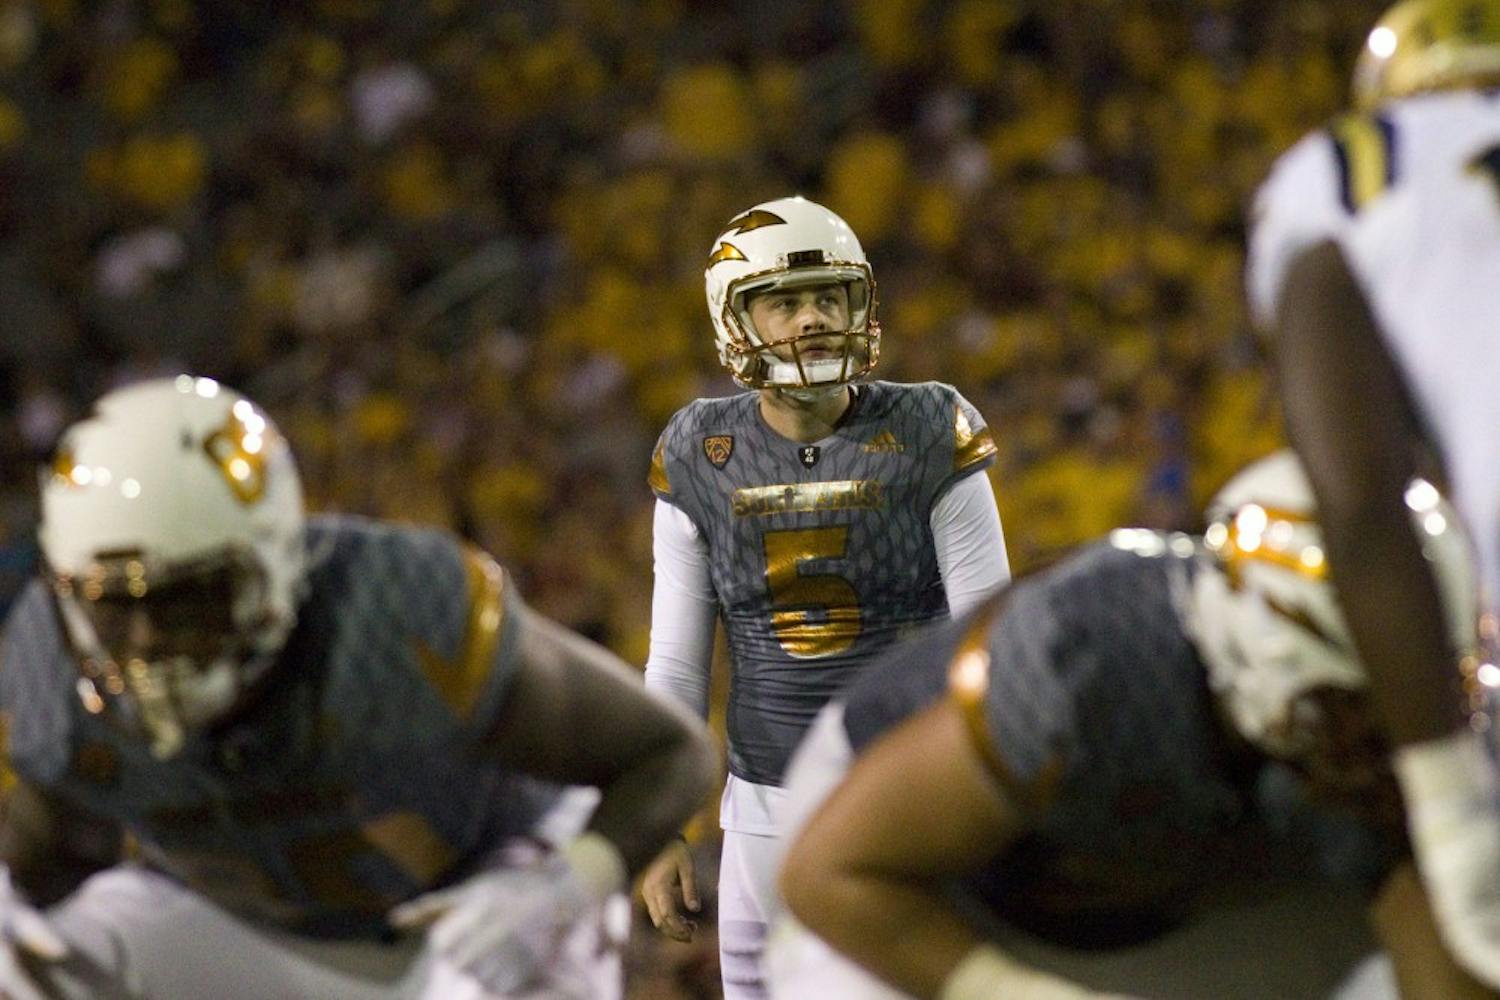 ASU senior kicker Zane Gonzalez (5) looks to the uprights before kicking a field goal in the second half of the 23-20 victory over the UCLA Bruins in Sun Devil Stadium in Tempe, Arizona, on Saturday, Oct. 8, 2016. Gonzalez broke the NCAA record for most field goals in a career in the game.